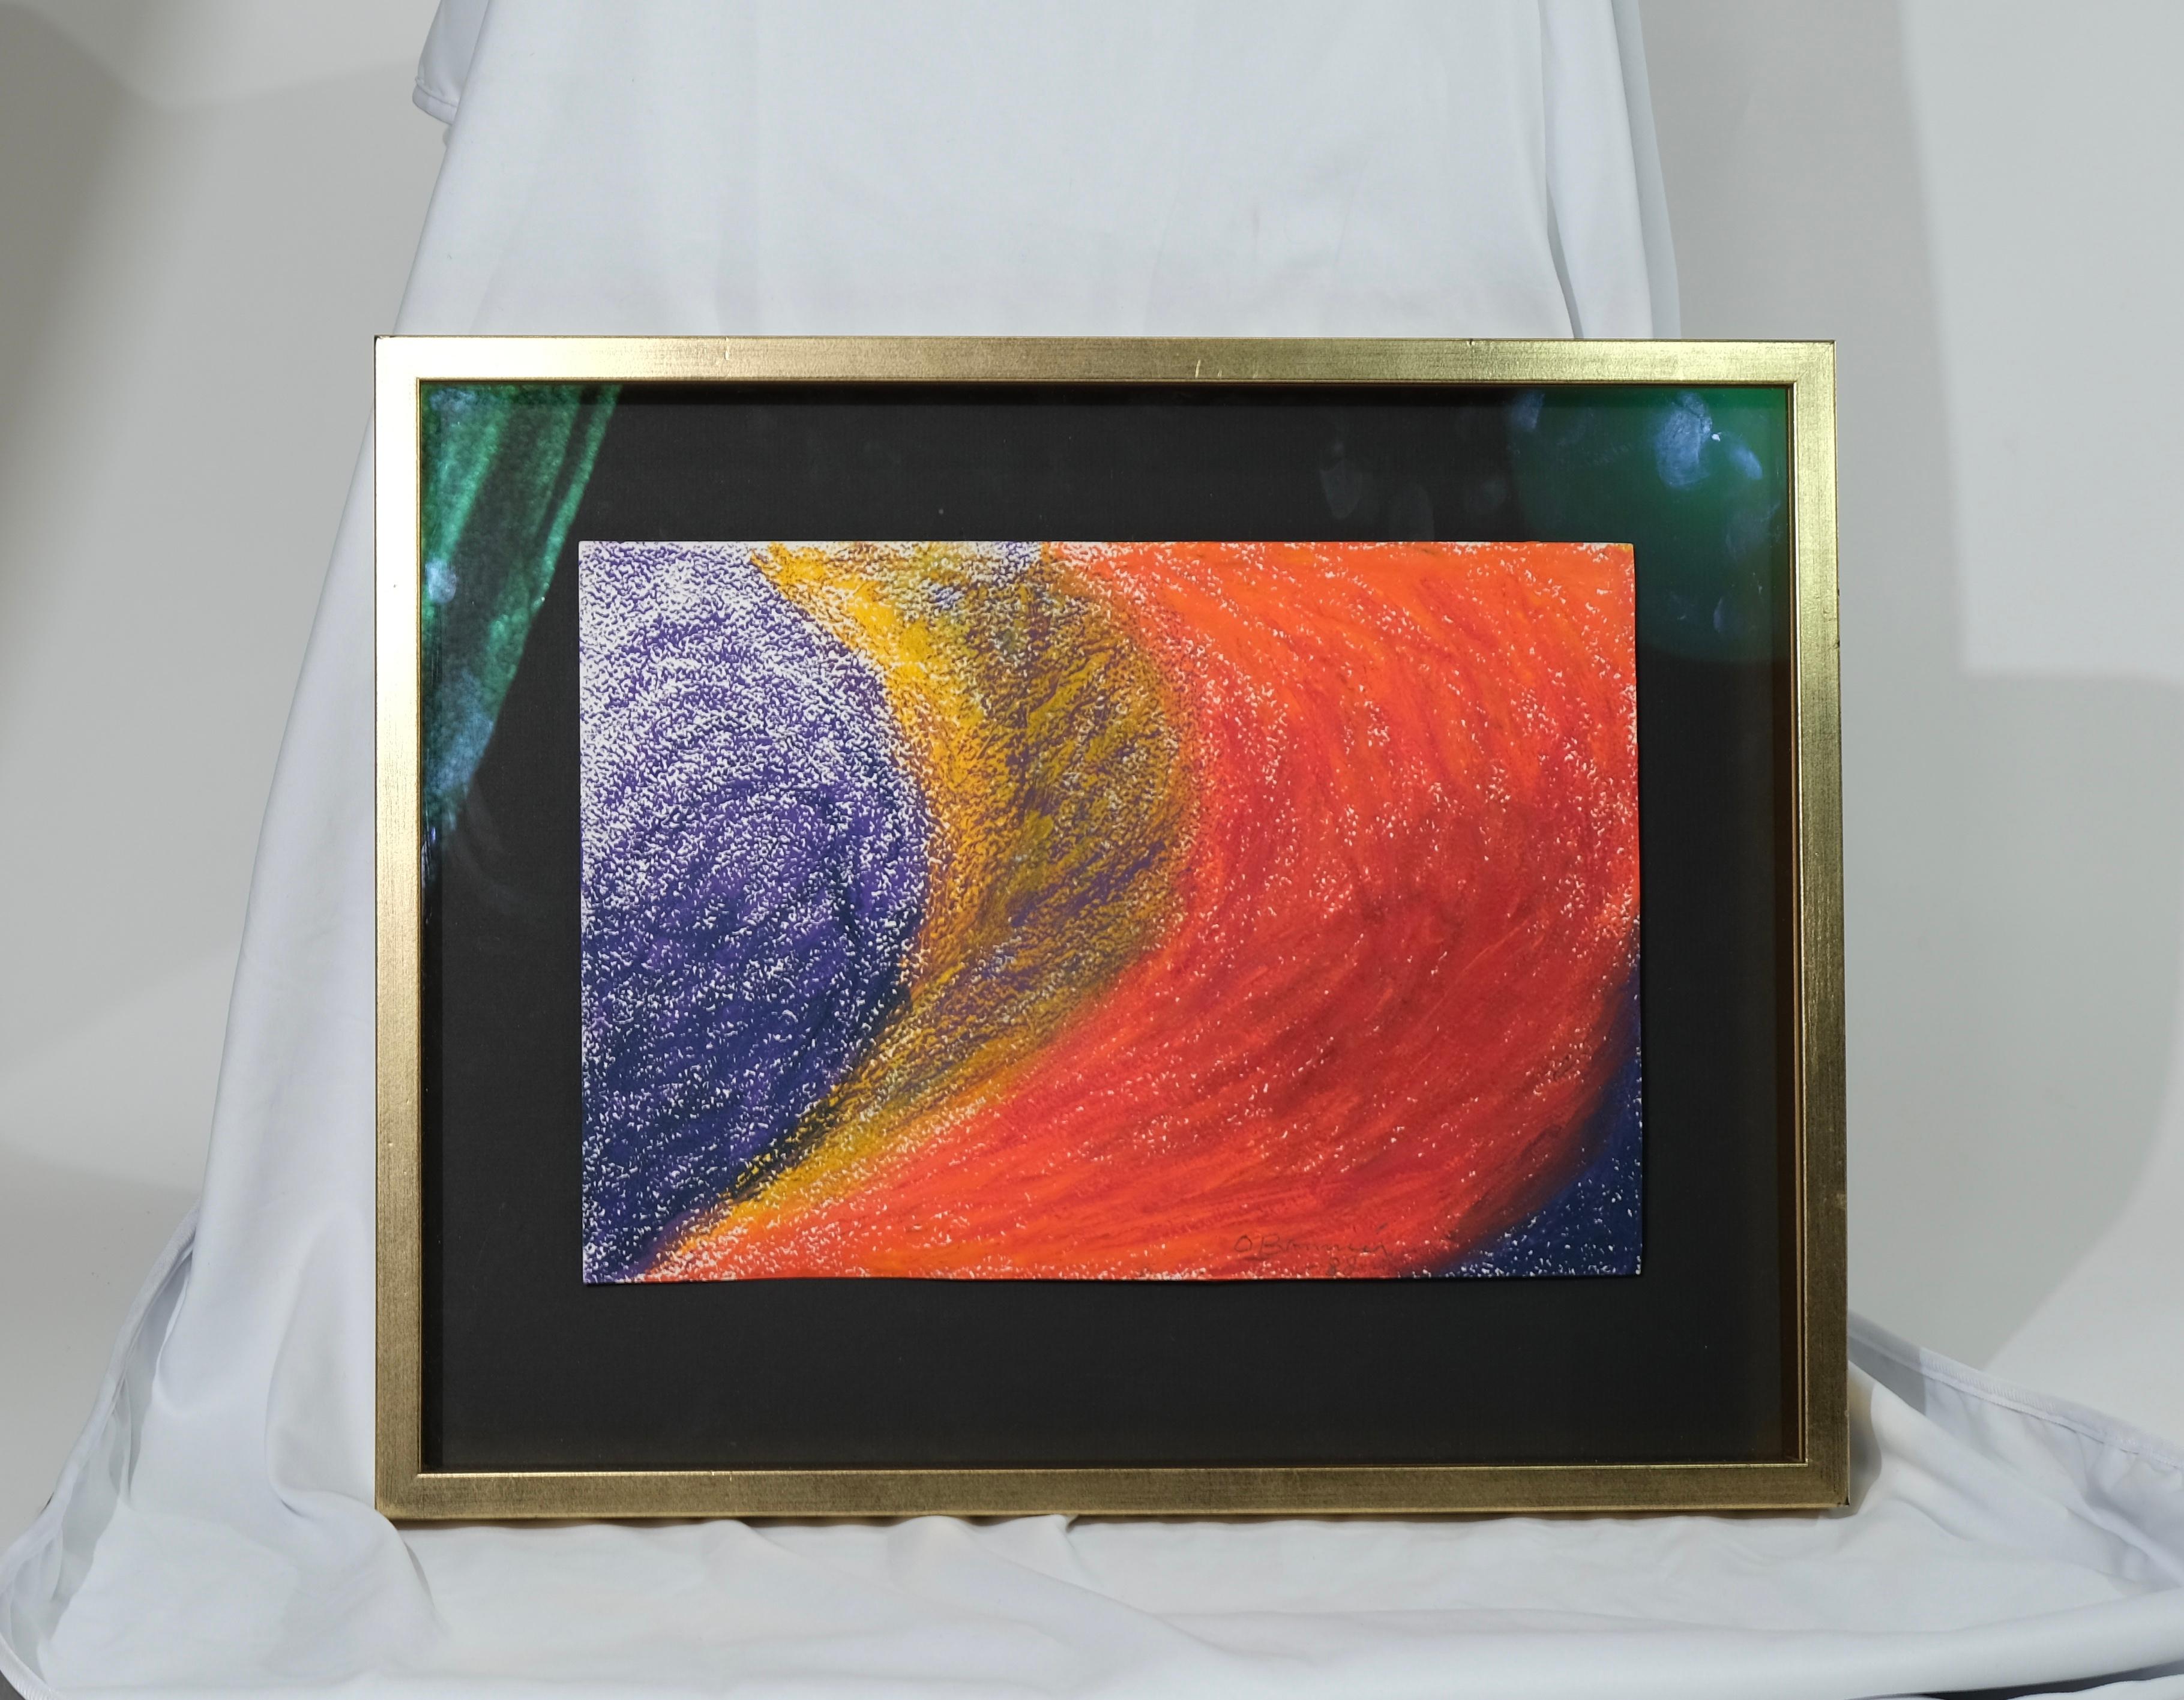 Pastel on paper.
Measurements with frame 49 × 40 cm. Without 35 × 25 cm.

A typical example of Olle Bonniers art. The colors and shapes are much spacelike.